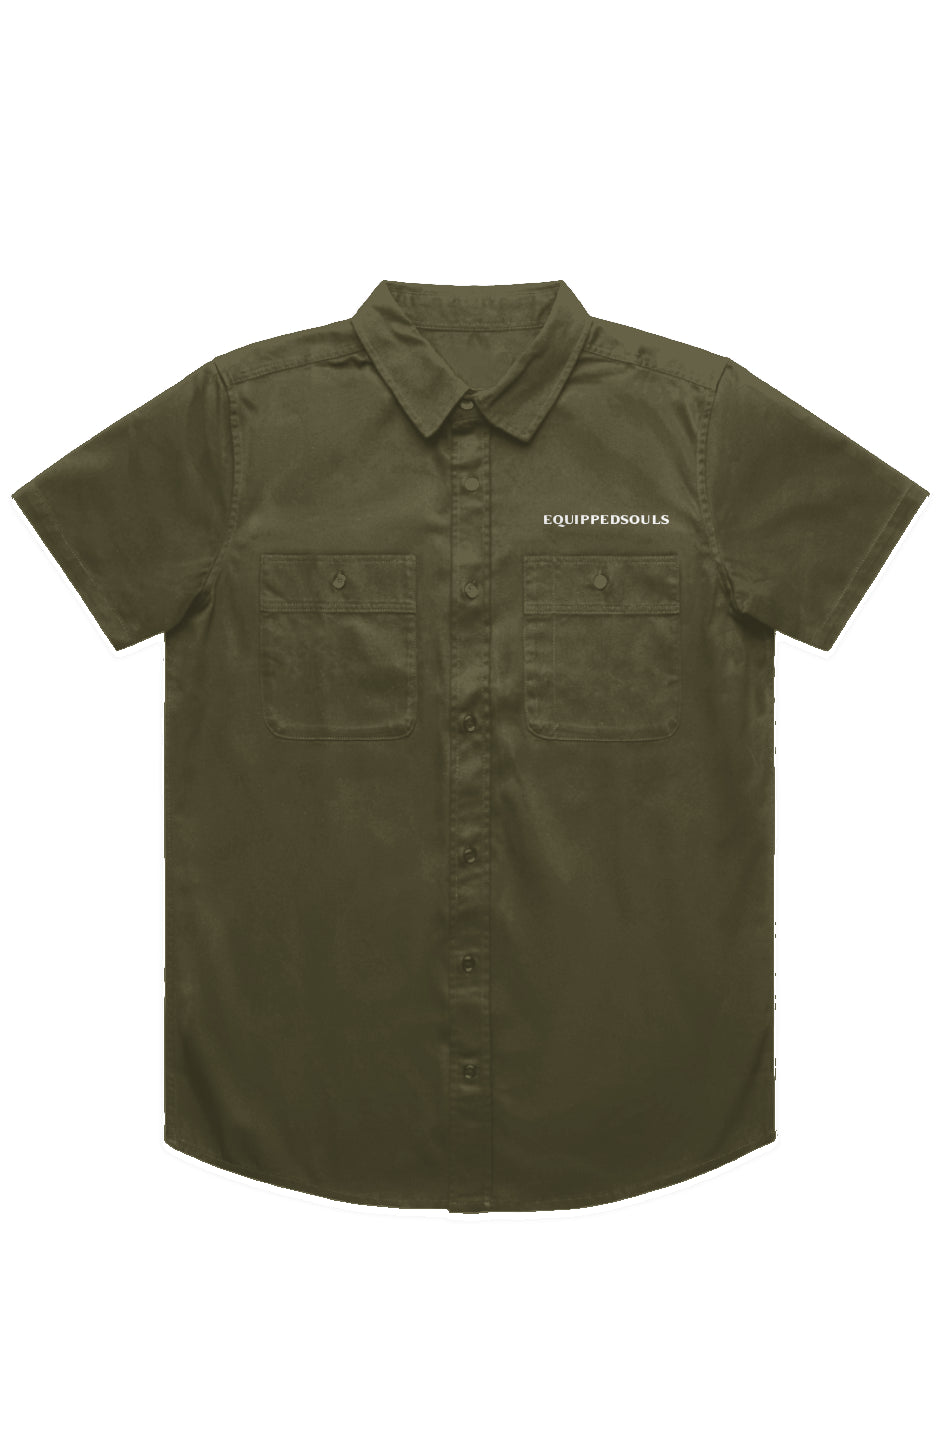 Equipped Souls Workwear S/S Shirt